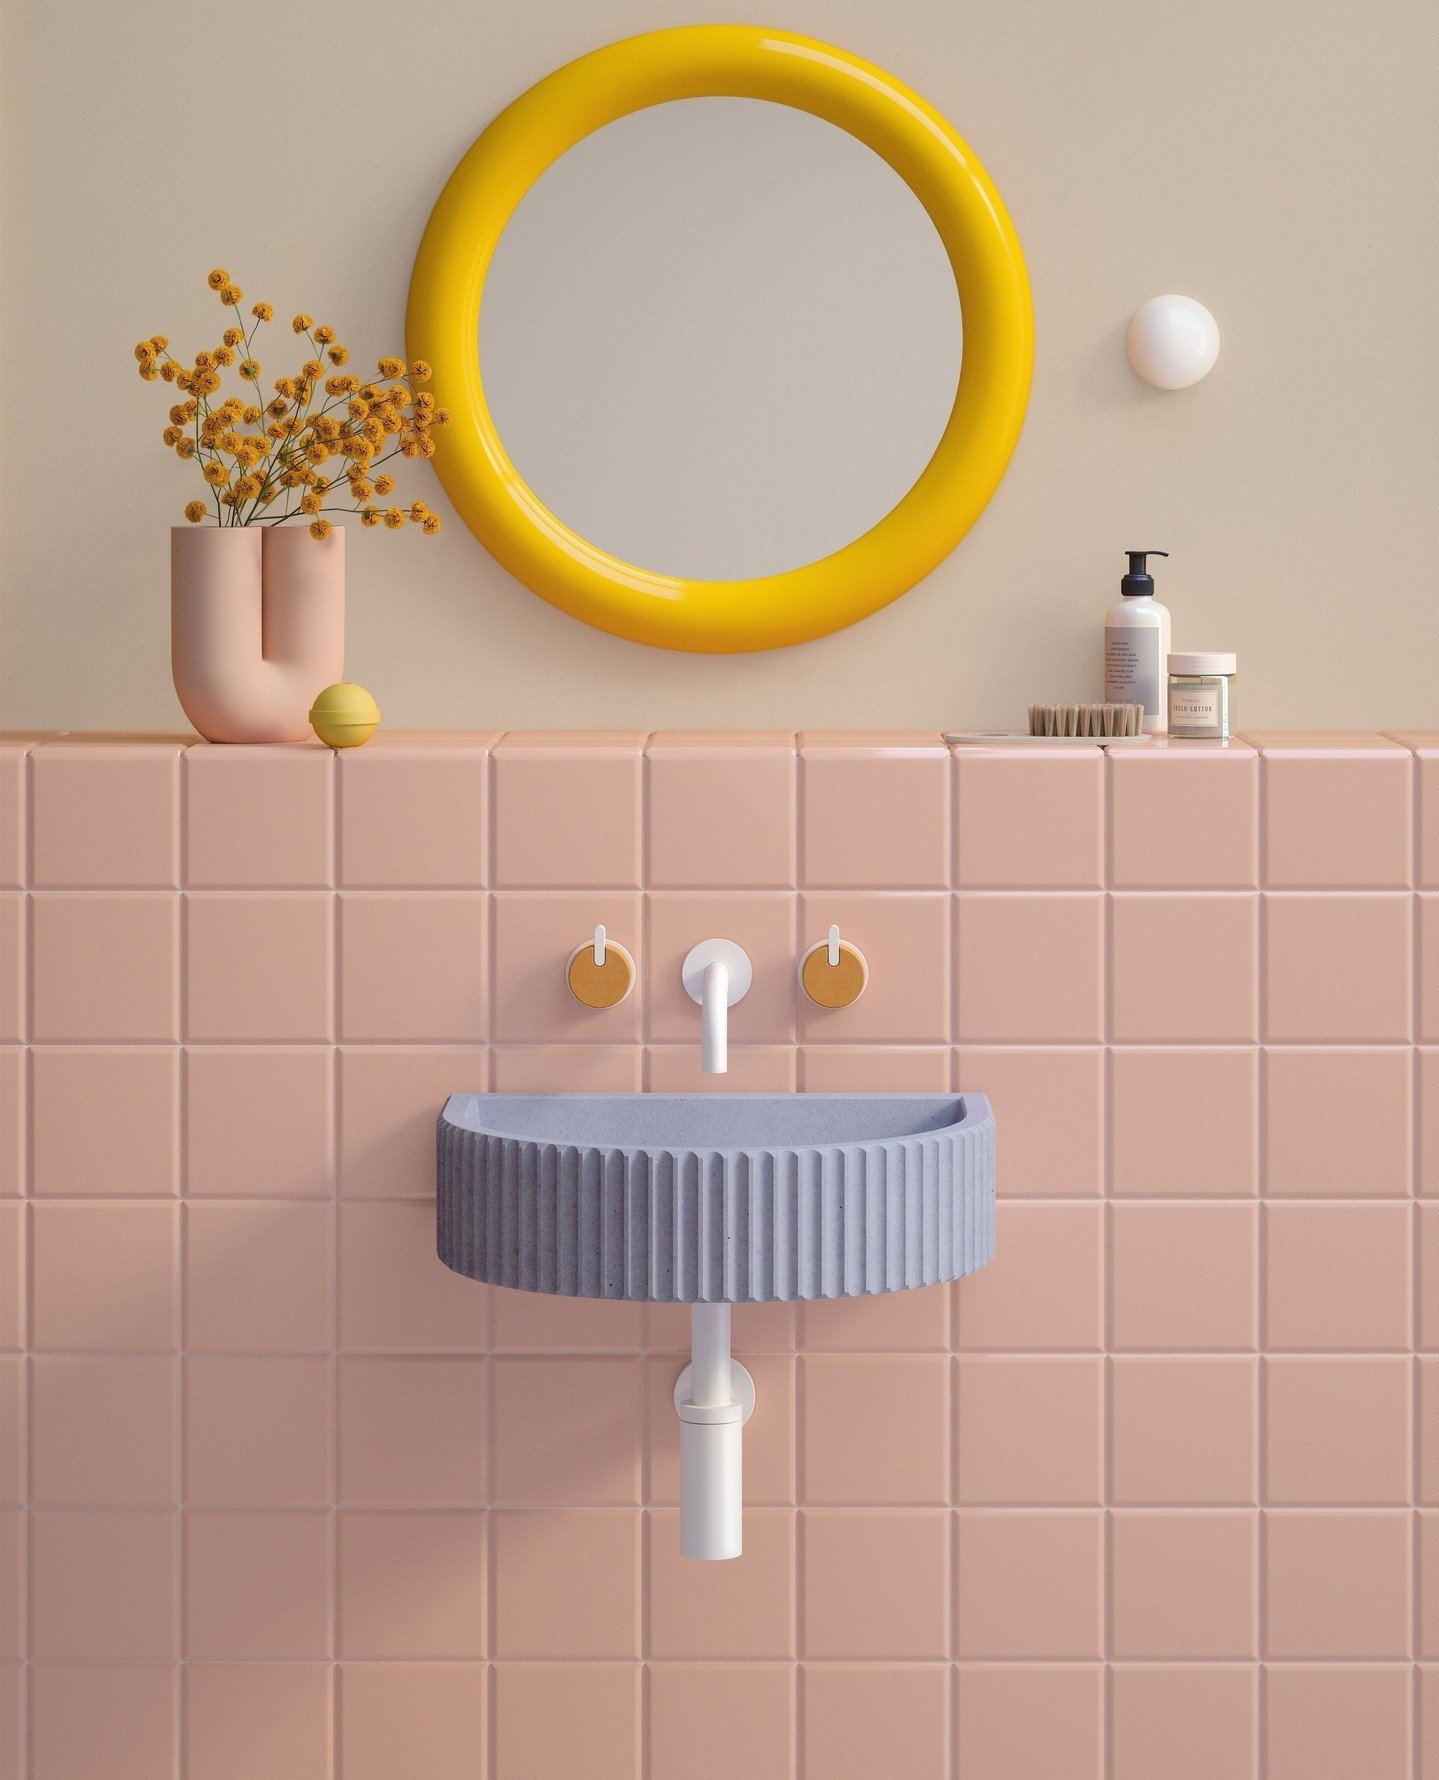 Playful patterns and bold textures 💫 See the latest in colour and finishes from Kast at Salone del Mobile.⁠
⁠
📍Pavilion 6 Stand A38 A40⁠
Corso Italia, 20017 Rho MI, Italy⁠
⁠
Milan Design Week | Salone del Mobile | Colourful Bathroom Design⁠
⁠
@isal